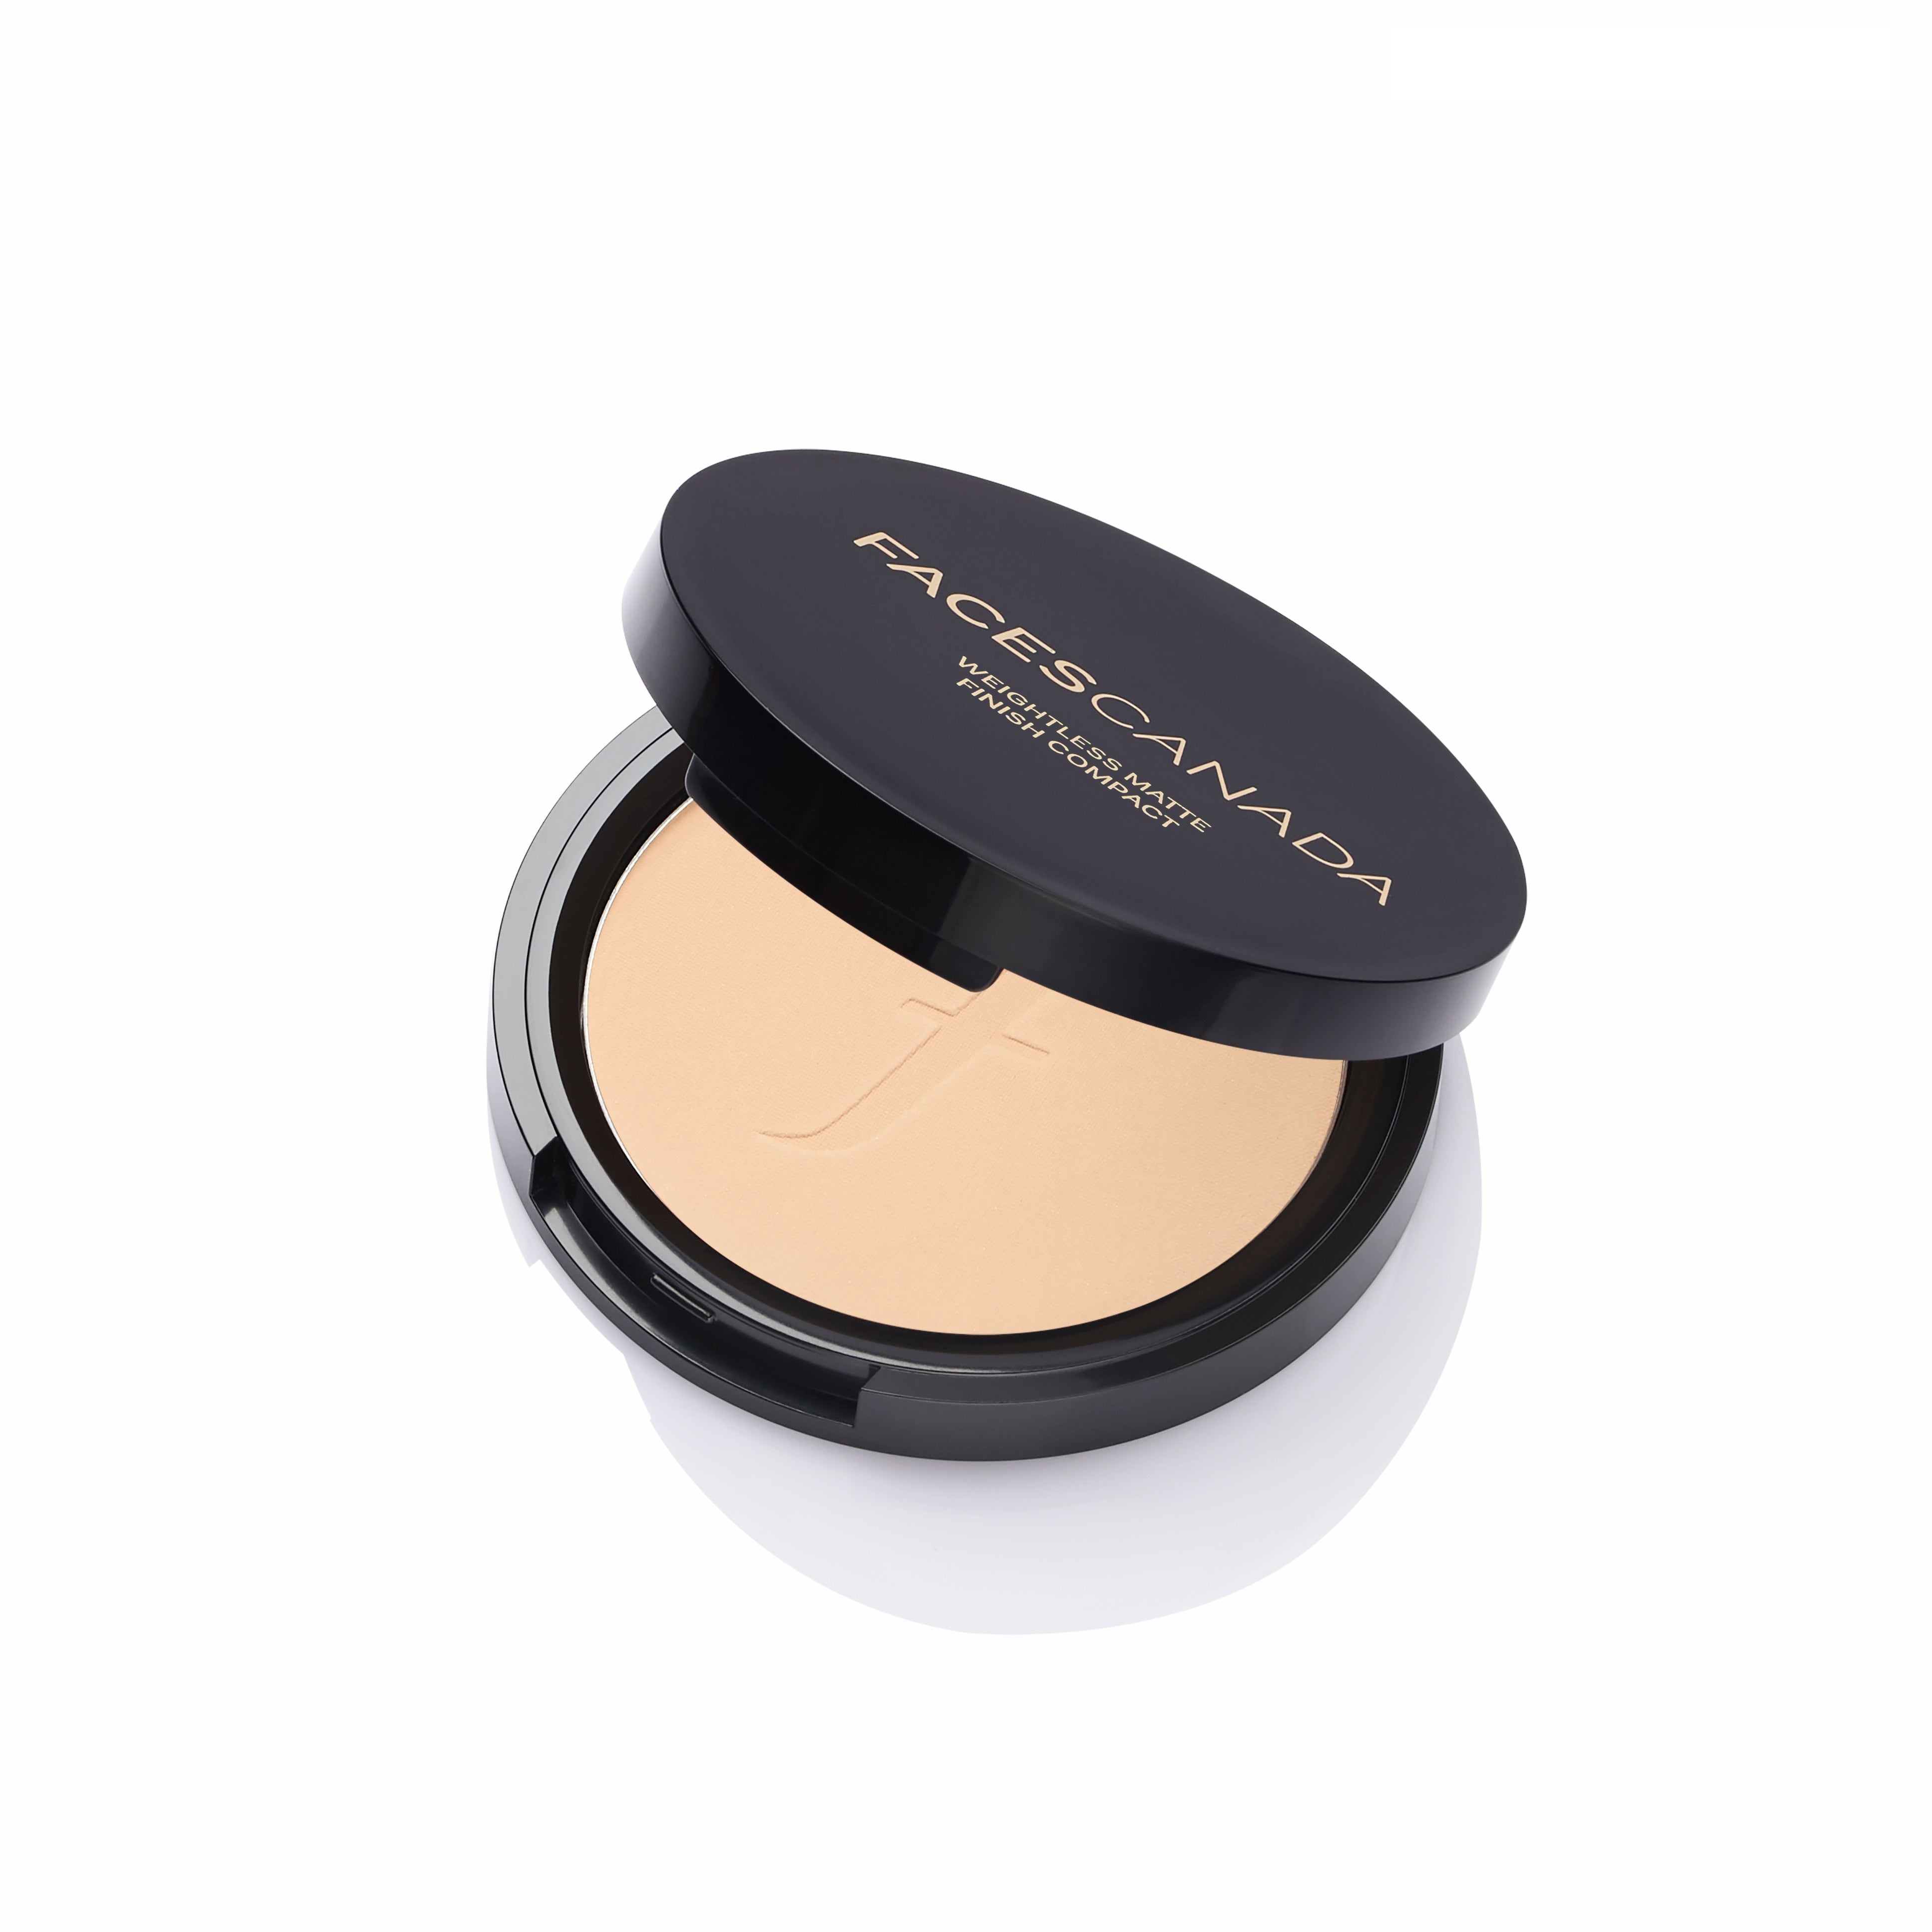 Faces Canada Weightless Matte Finish Compact Faces Canada